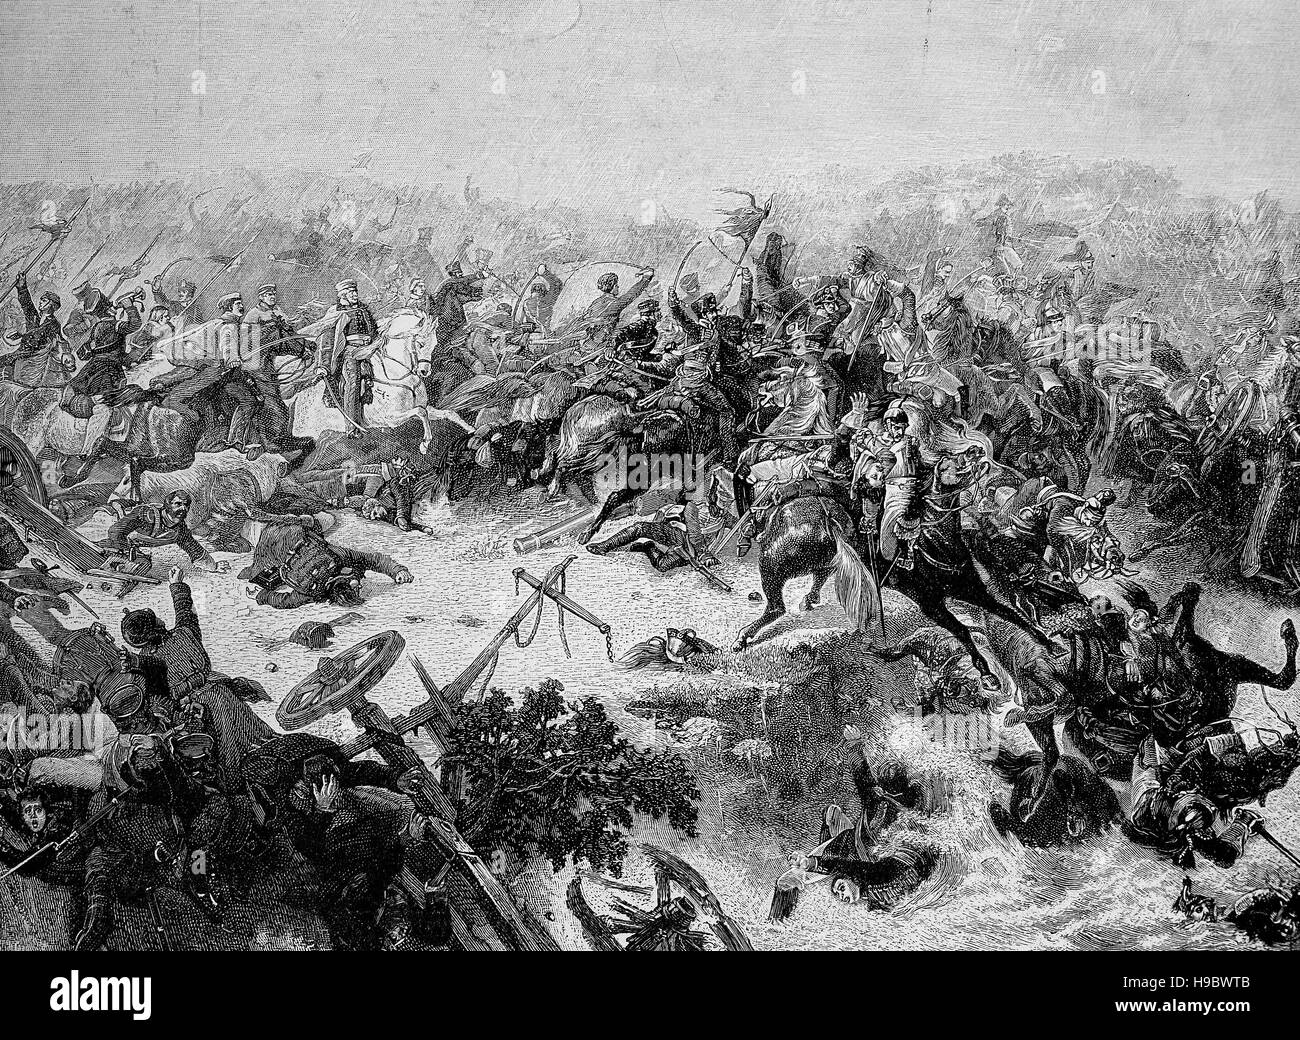 The Battle of the Katzbach on 26 August 1813, was an engagement of the Napoleonic Wars, historical illustration Stock Photo